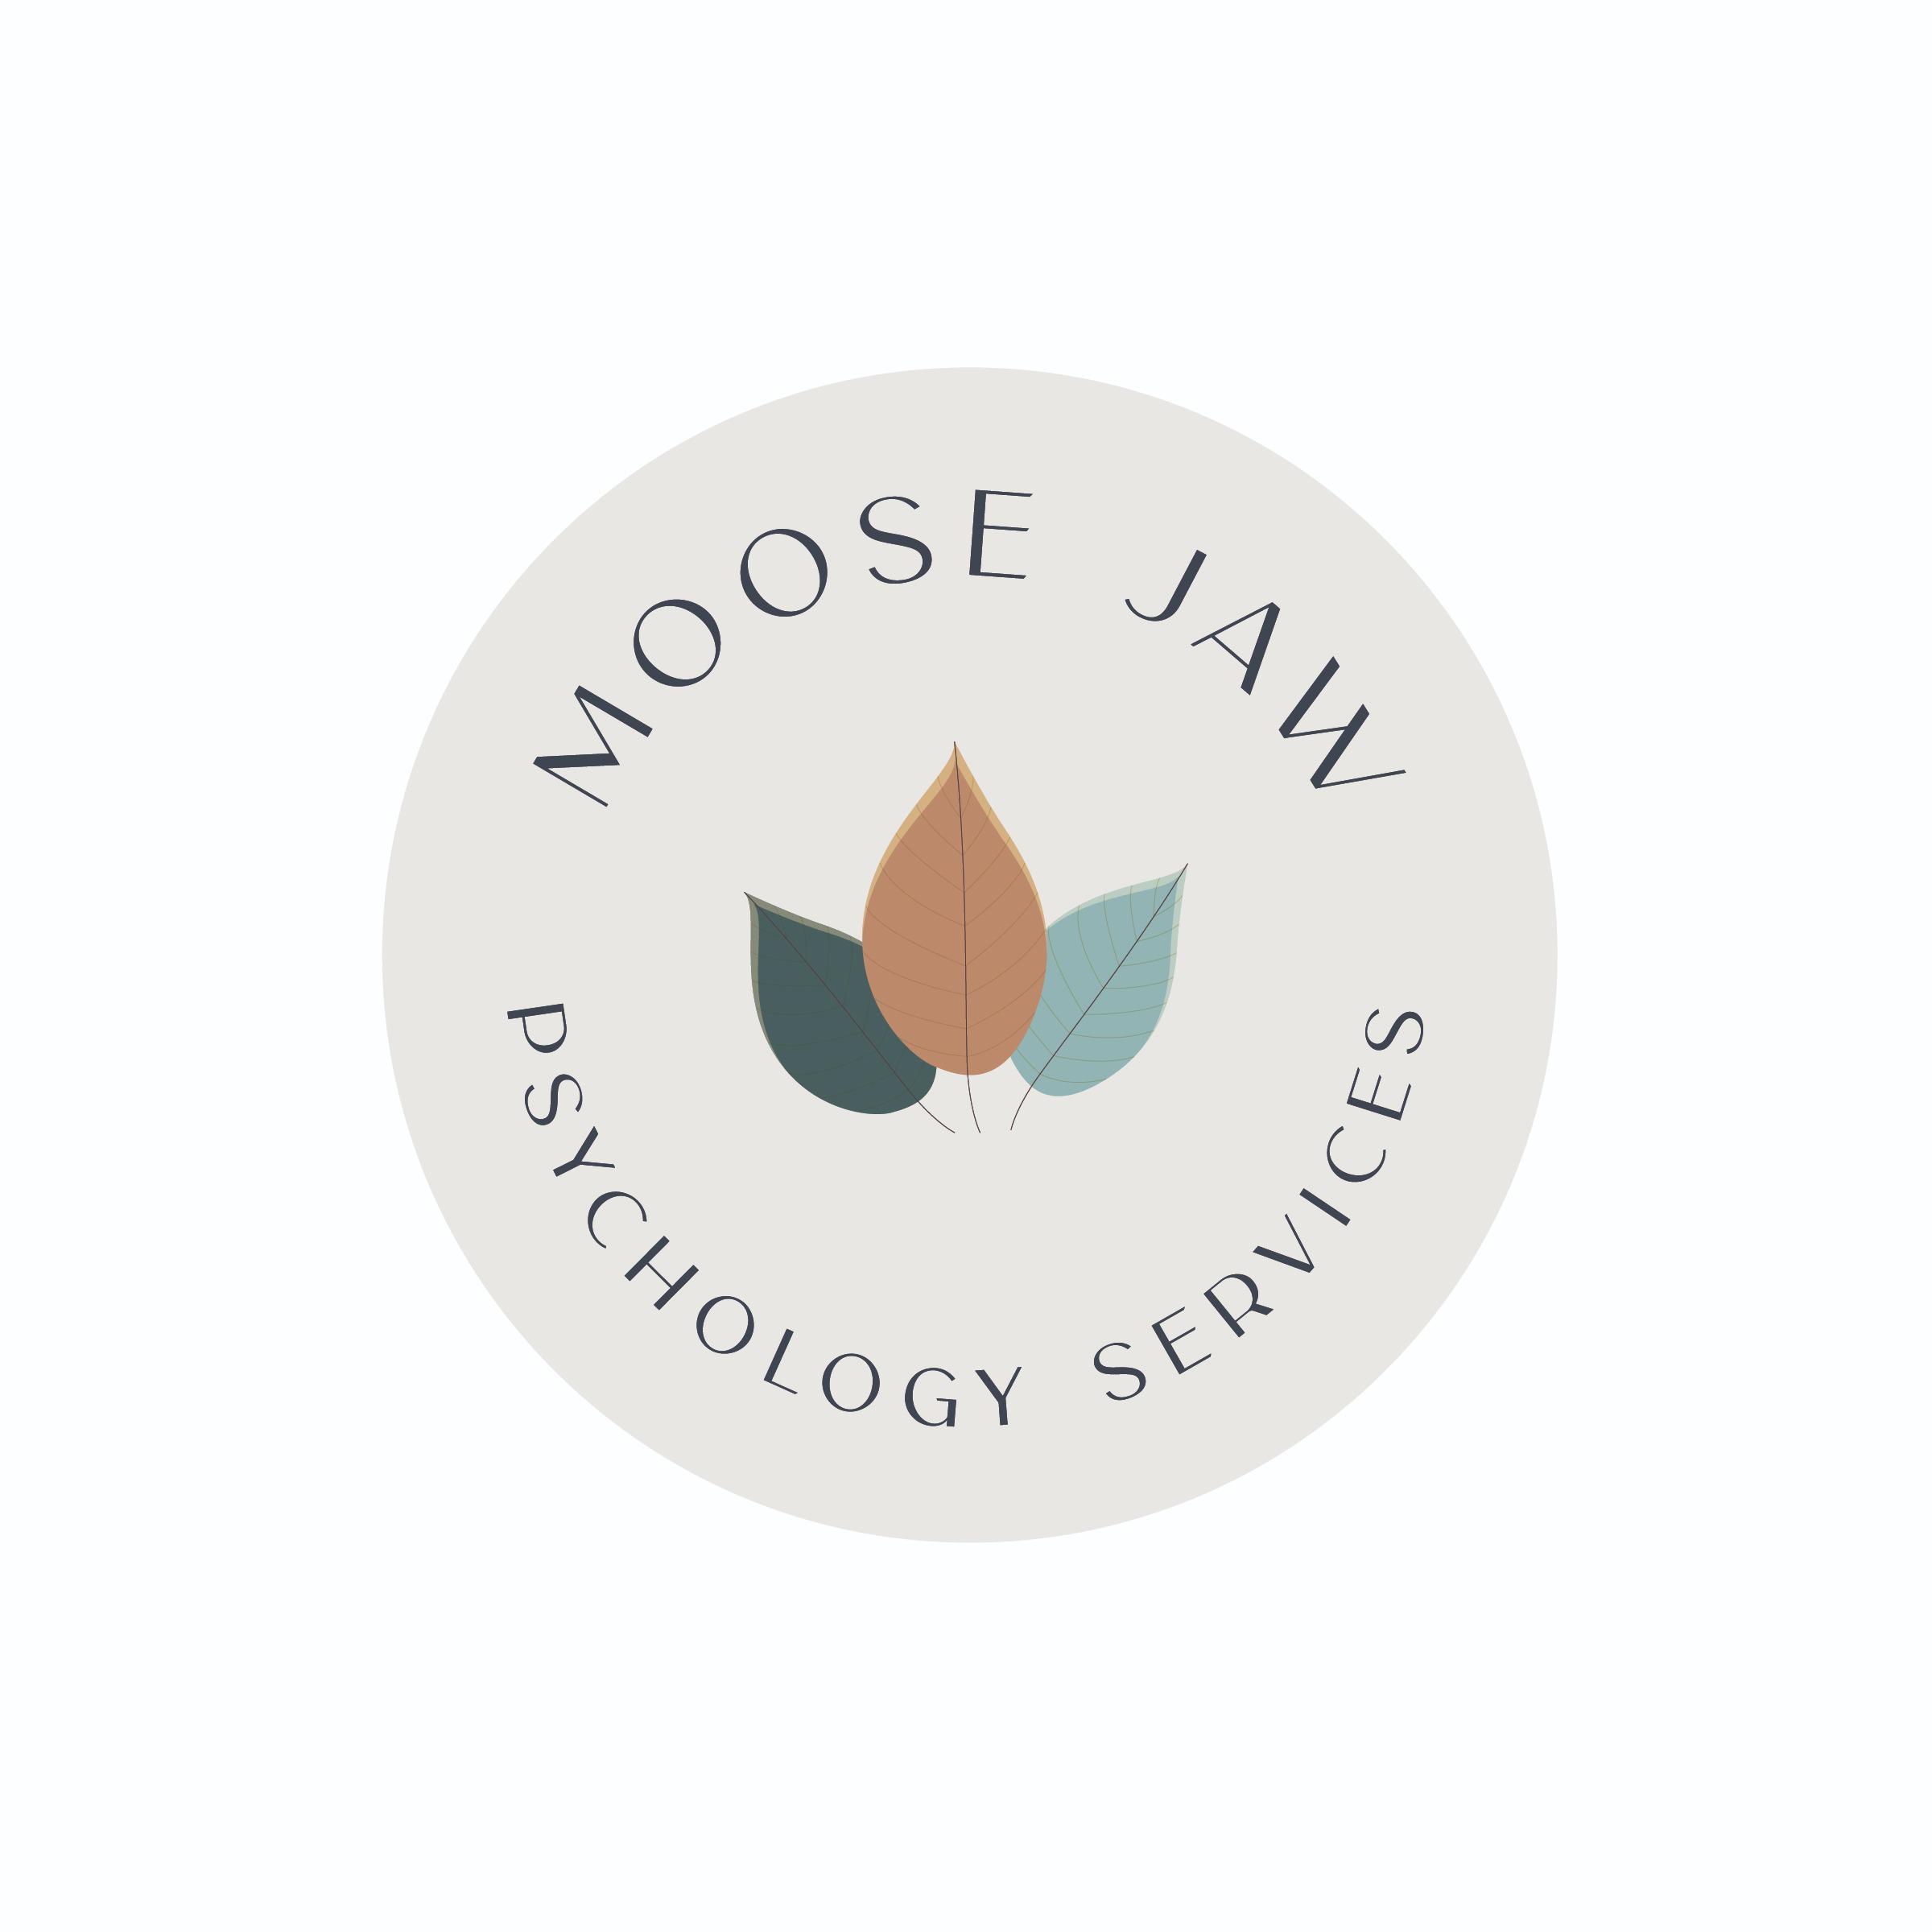 Moose Jaw Psychology Services